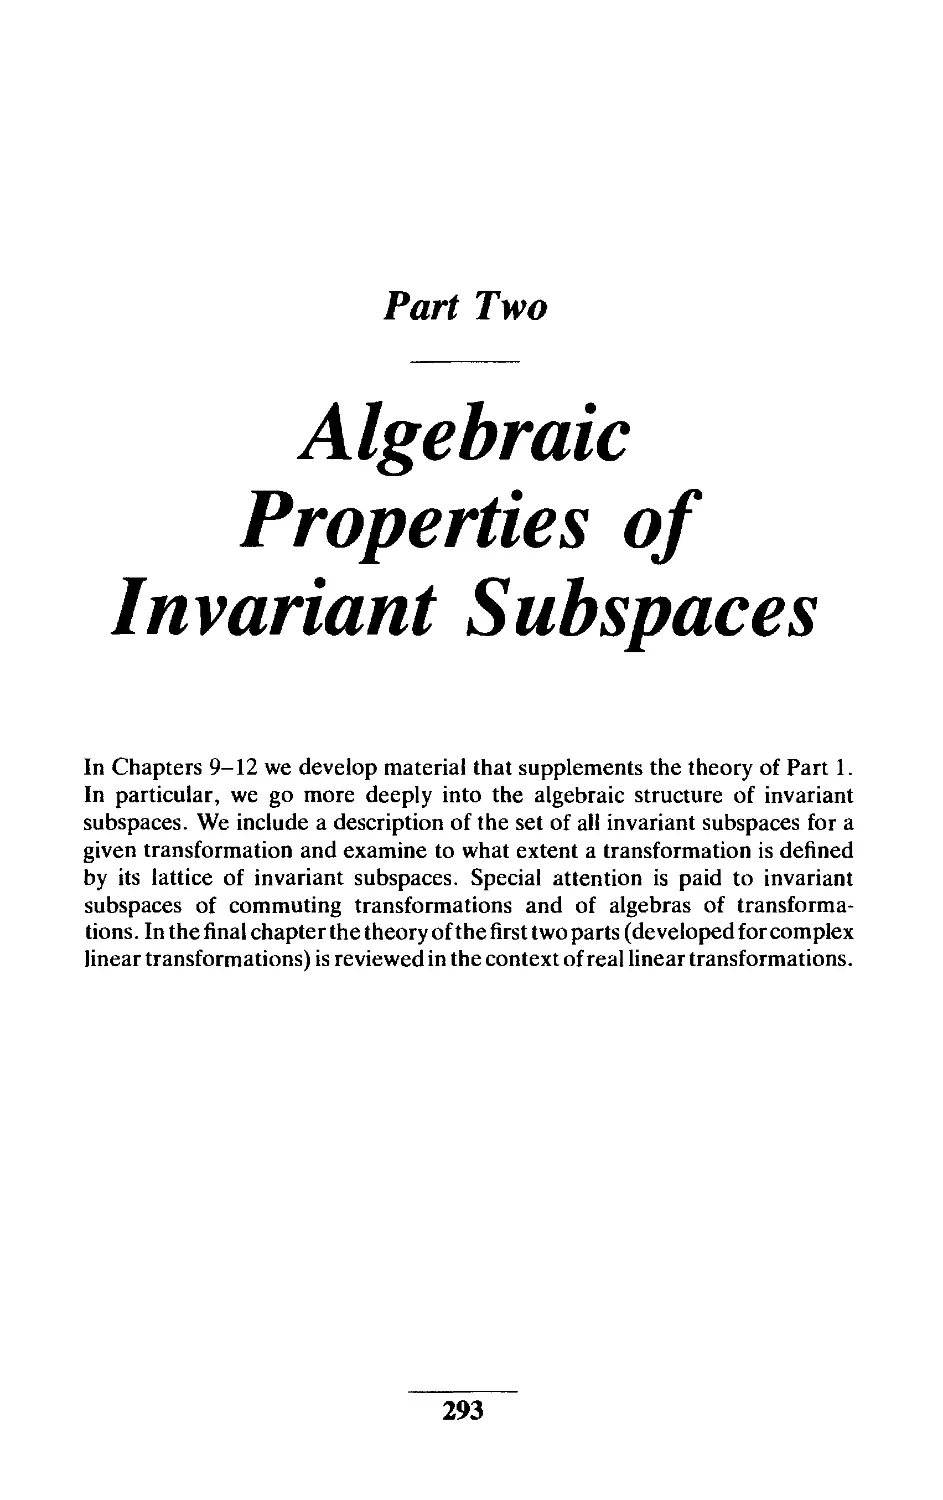 Part Two Algebraic Properties of Invariant Subspaces